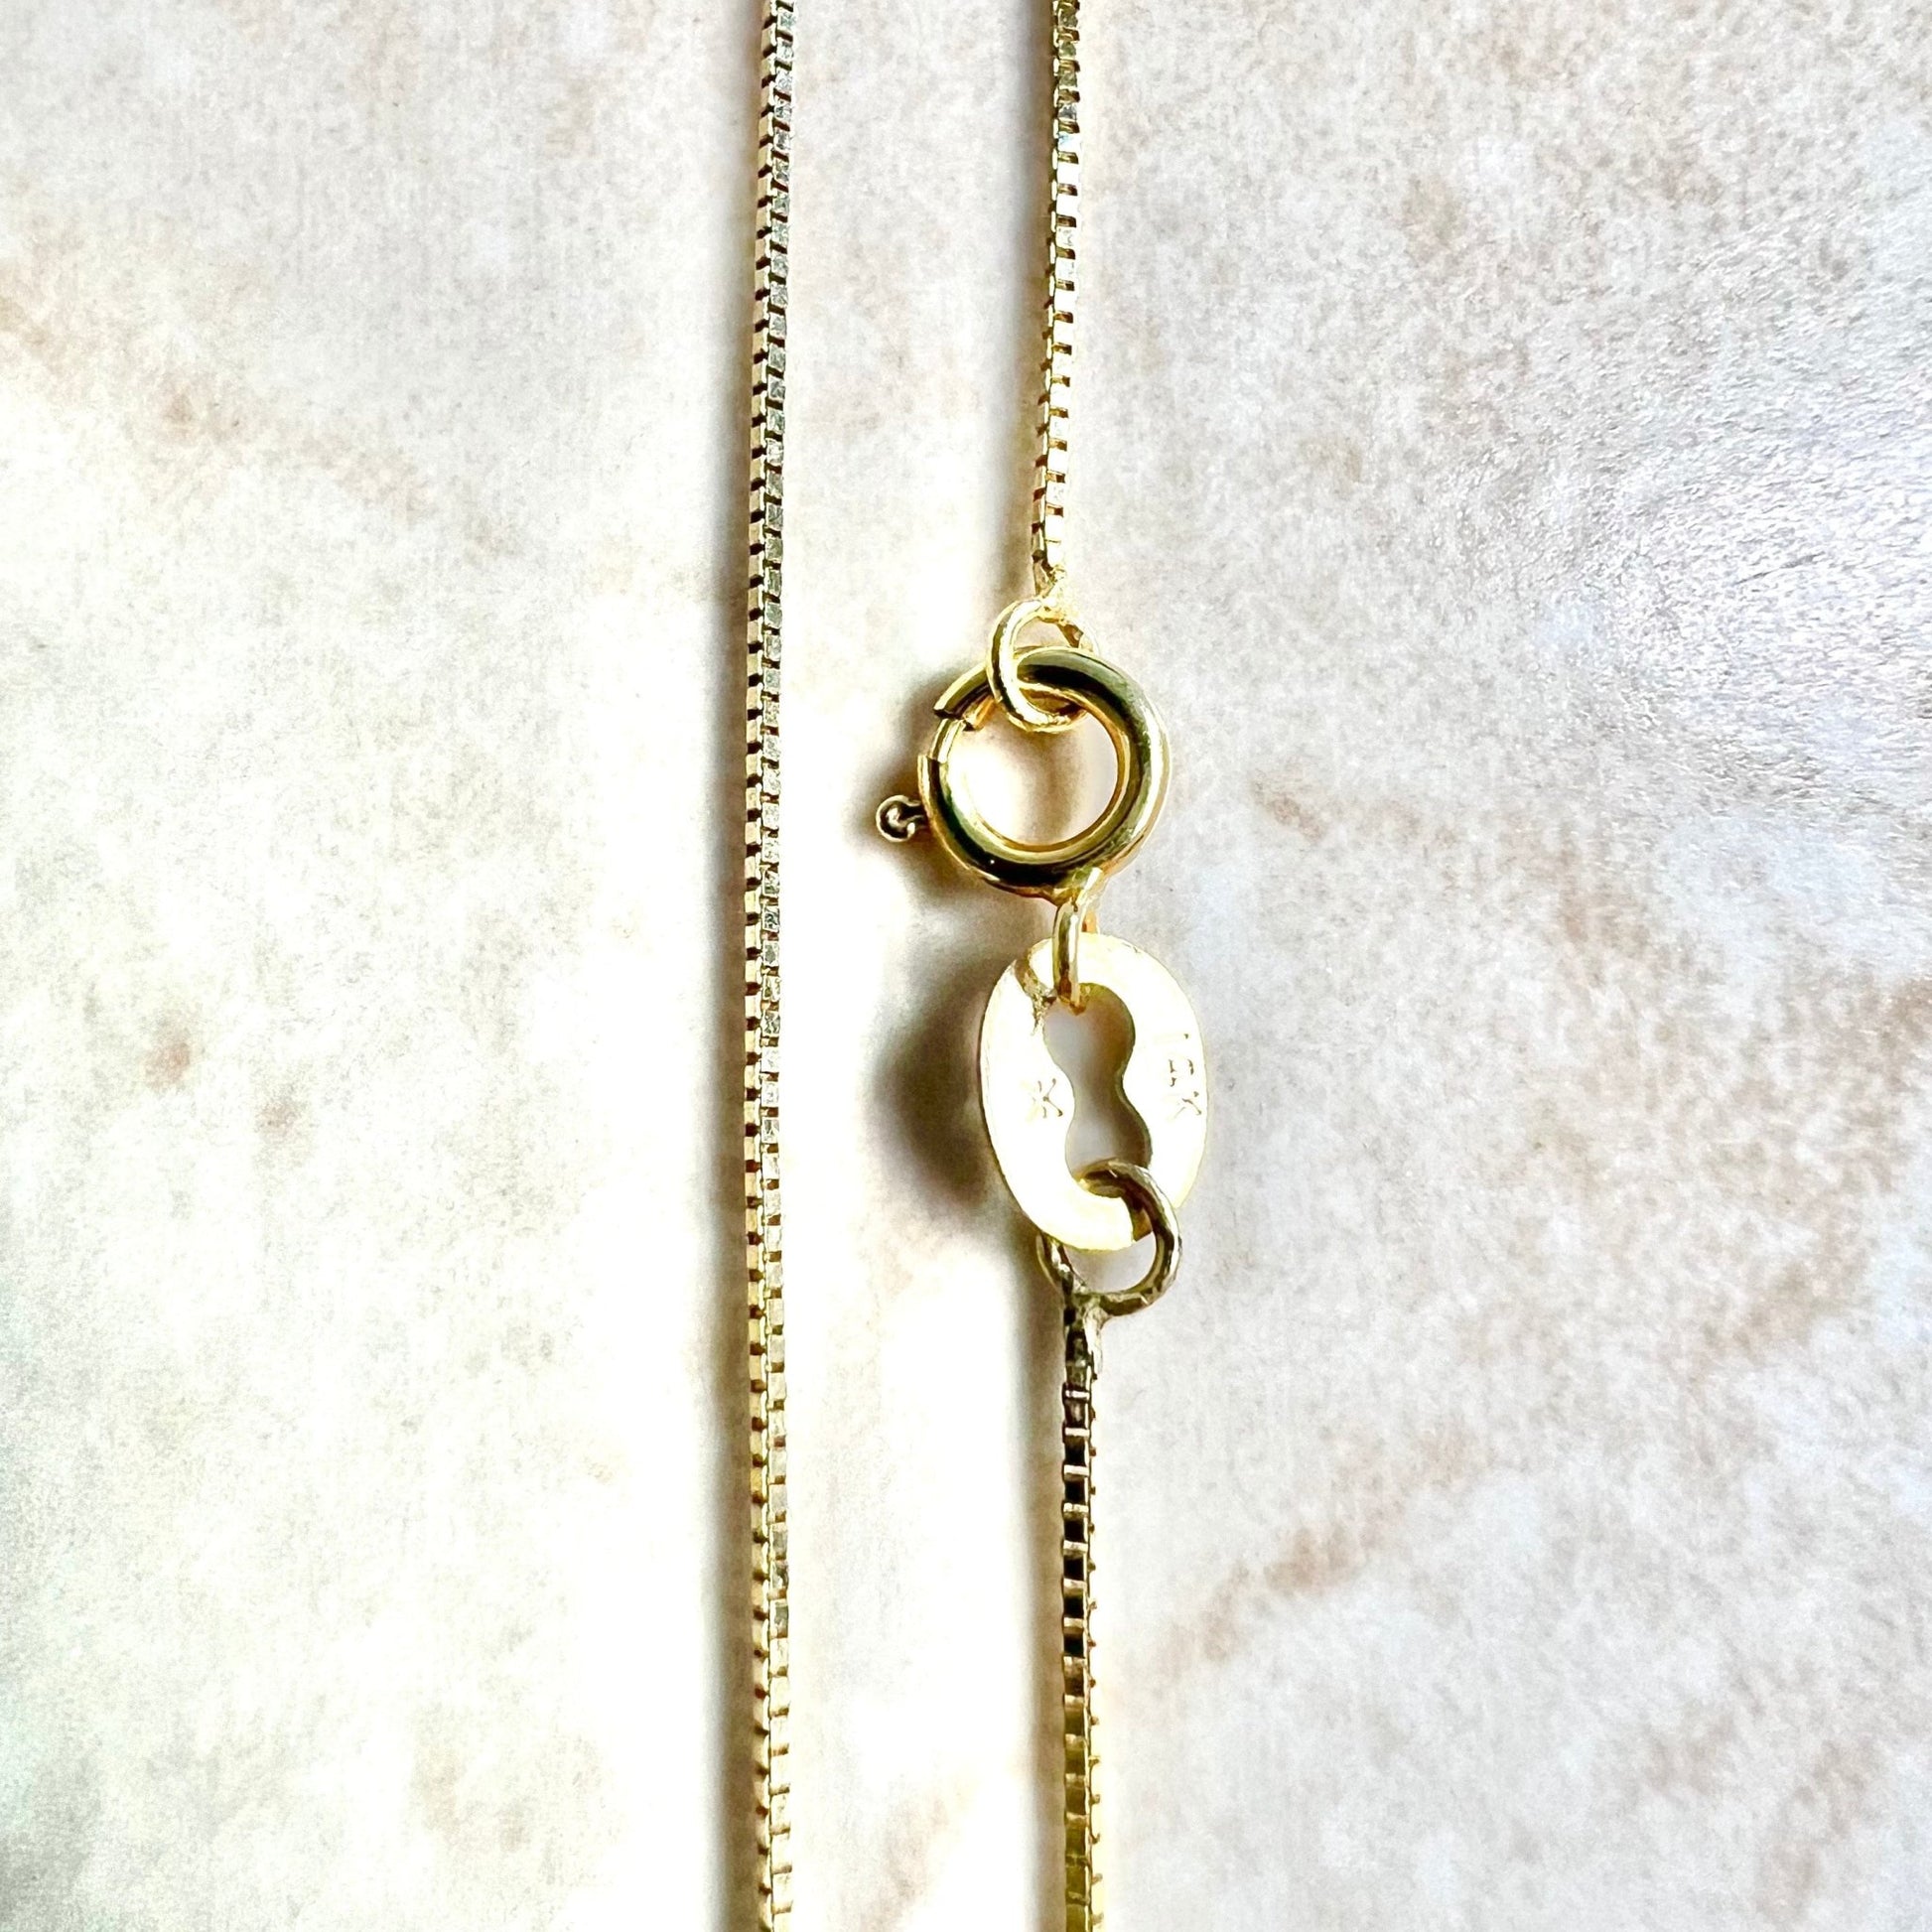 Lightweight 14K Yellow Gold Box Chain Necklace - 16 Inch Gold Chain Necklace - Yellow Gold Necklace - Gifts For Her - Minimalist Necklace